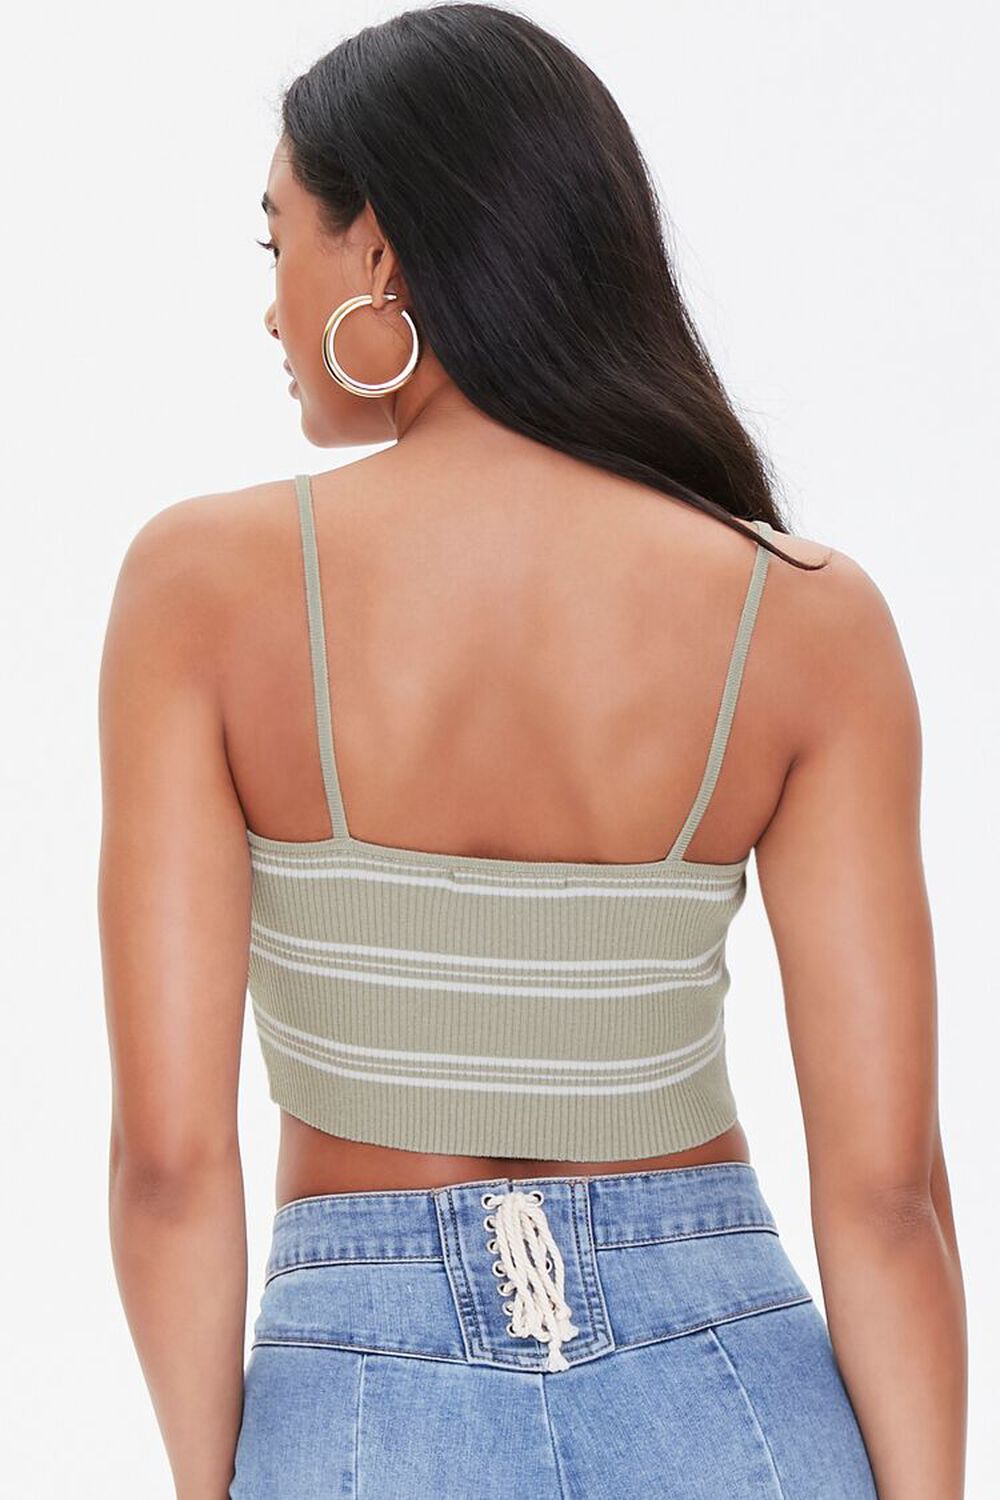 OLIVE/WHITE Striped Lace-Up Cropped Cami, image 3